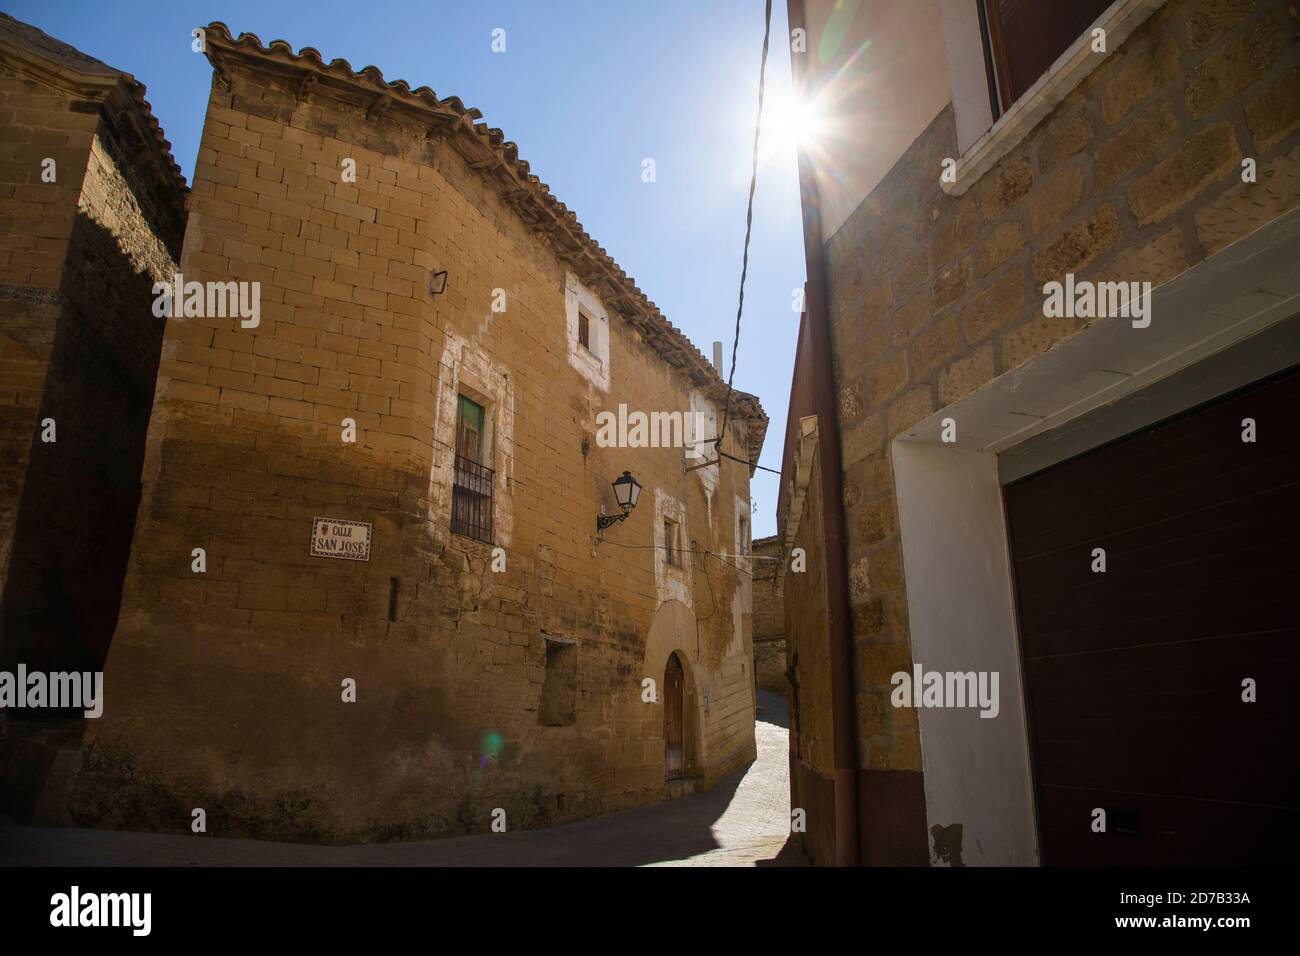 Picturesque streets with medieval buildings, in the small town of Ores, in the Cinco Villas region, Aragon, Spain. Stock Photo